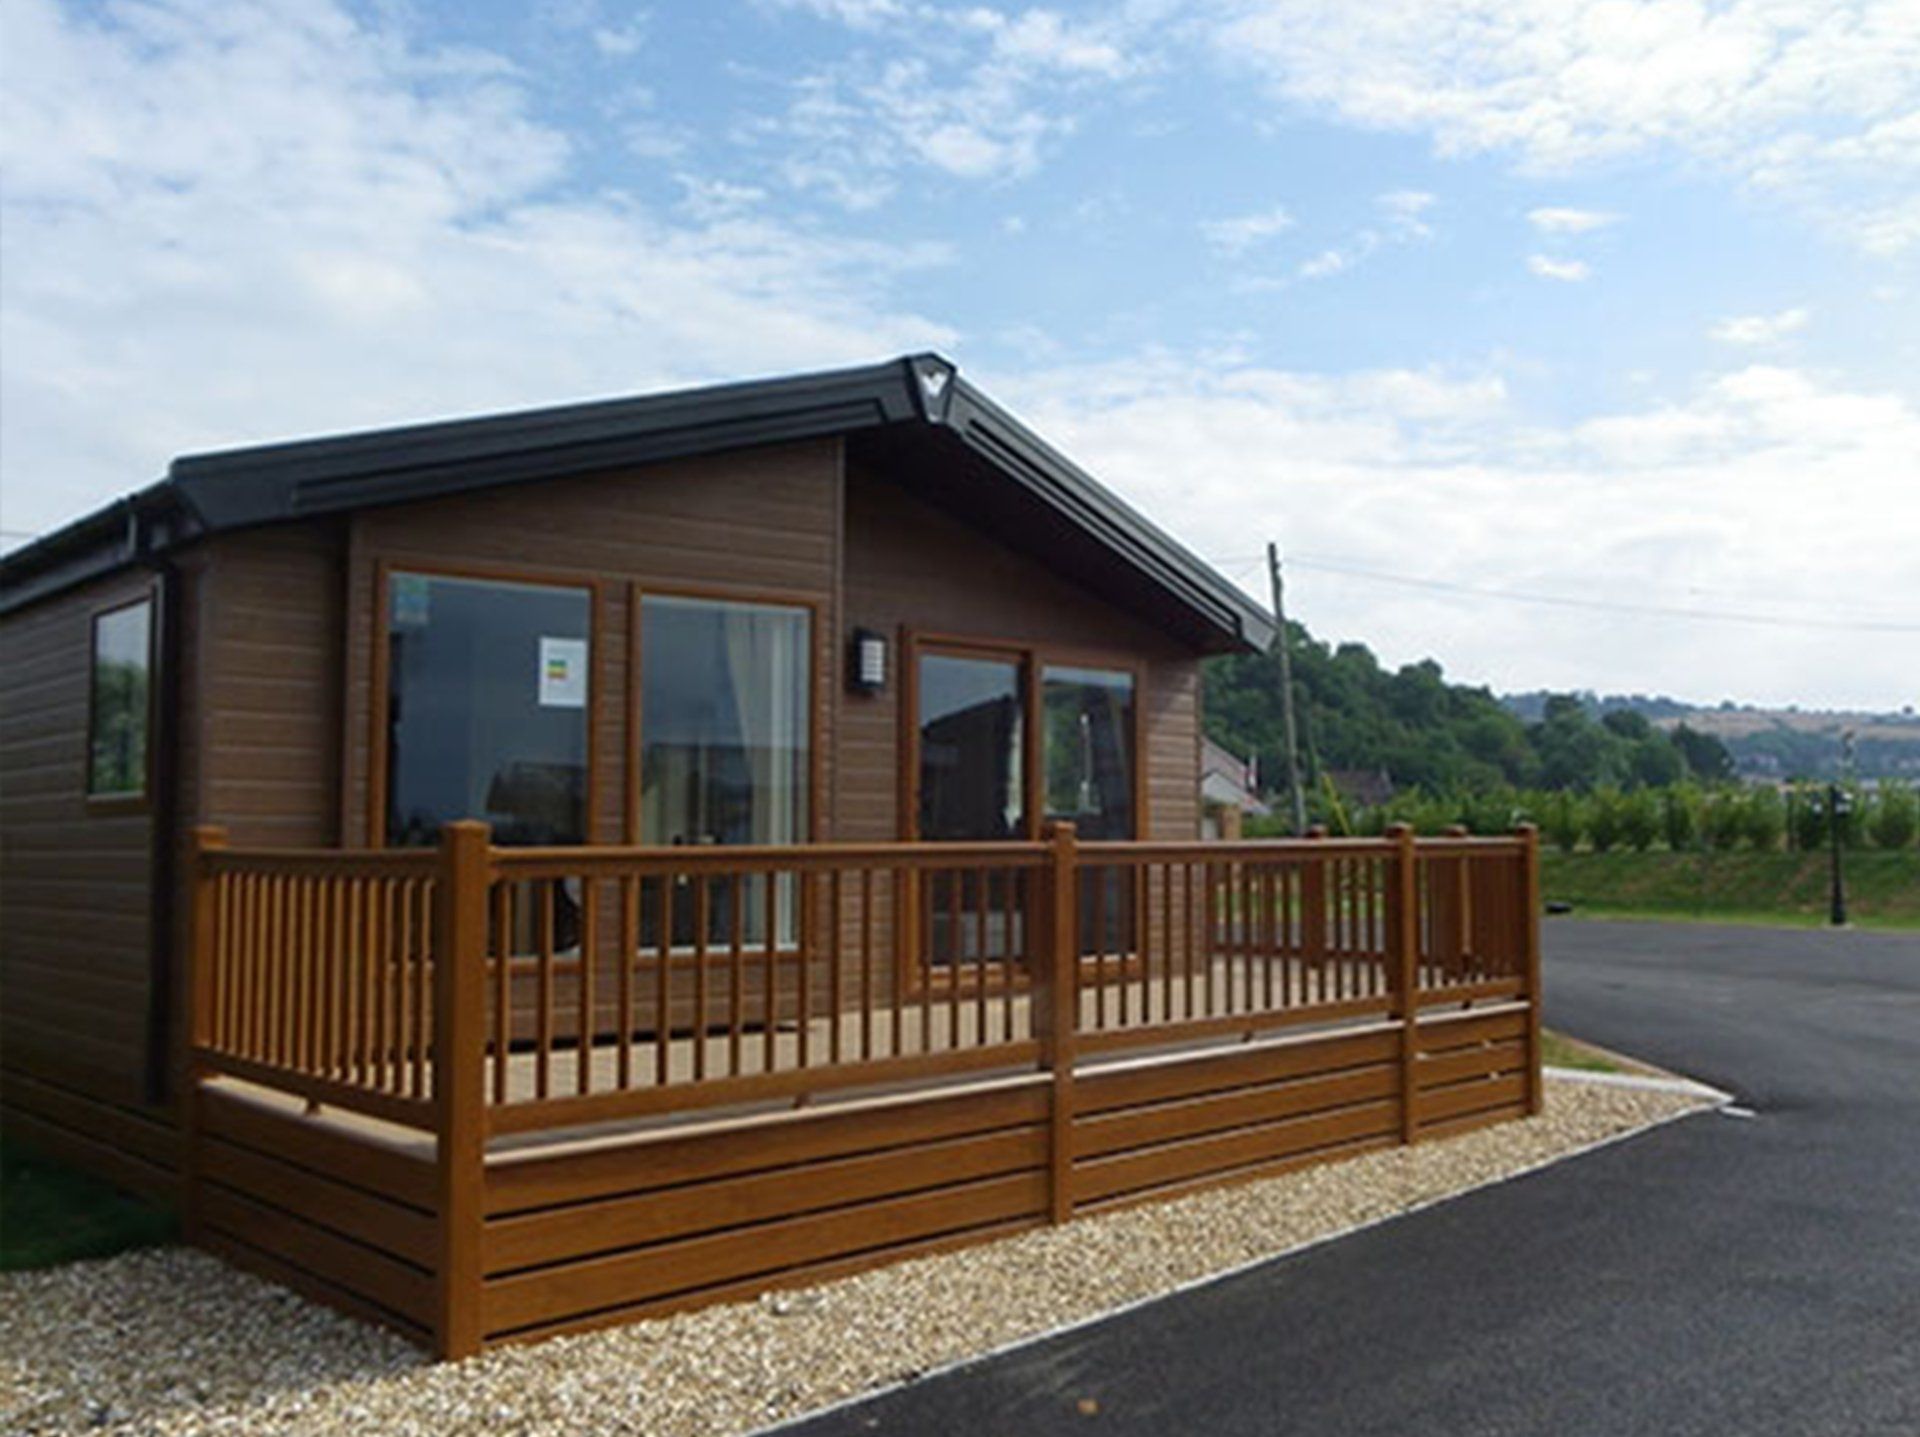 Holiday lodges for sale at Riverside holiday park near Weston-super-Mare.